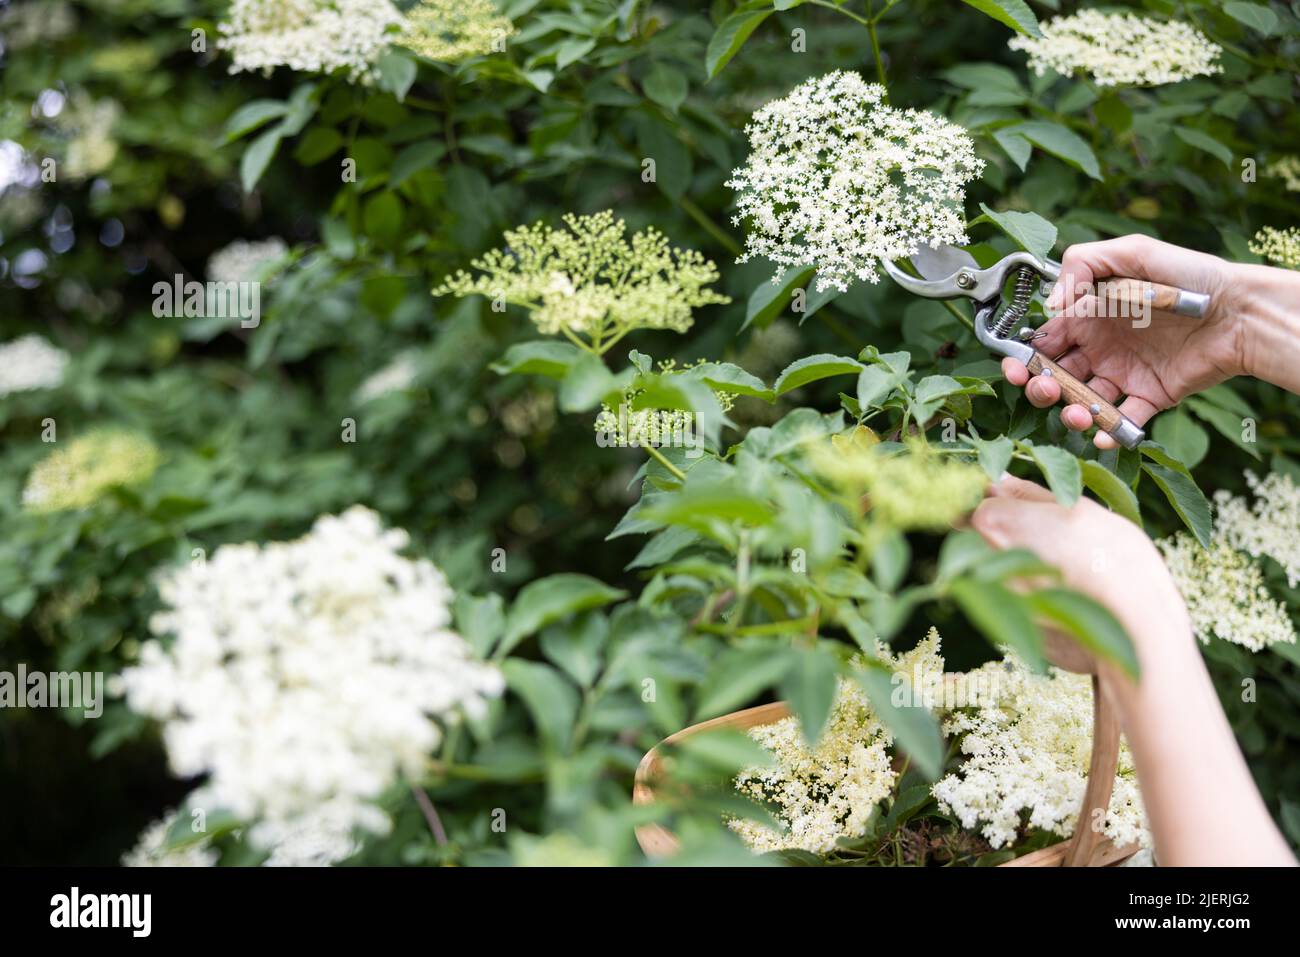 Close Up Of Woman Foraging For And Cutting Wild Elderflower From Bush With Secateurs And Putting In Basket Stock Photo